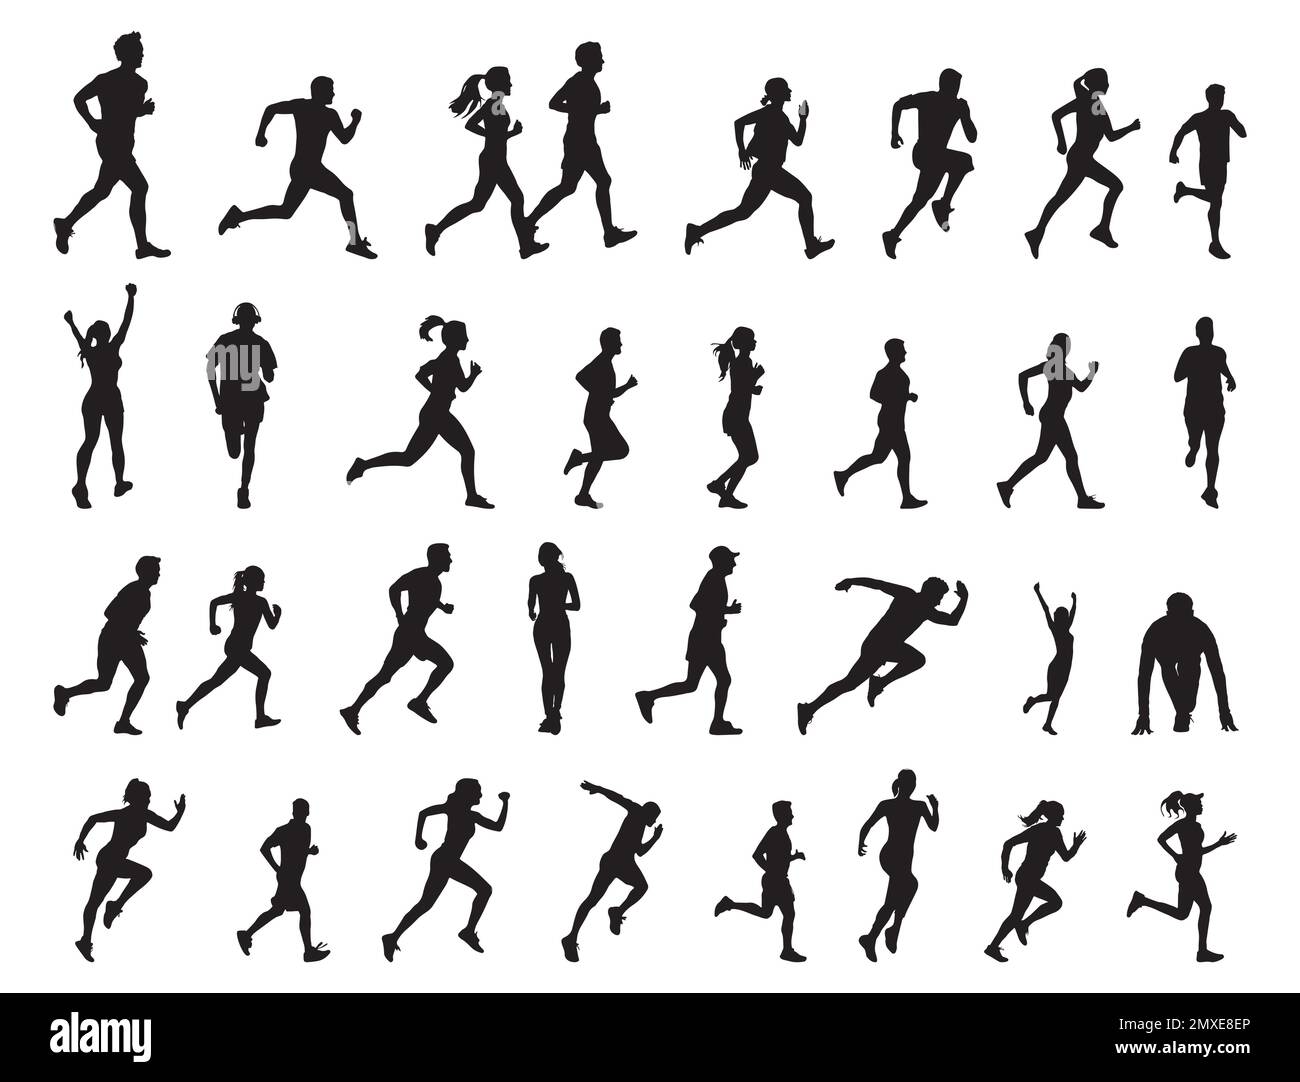 Collezione running people silhouettes, running man and woman silhouettes Illustrazione Vettoriale